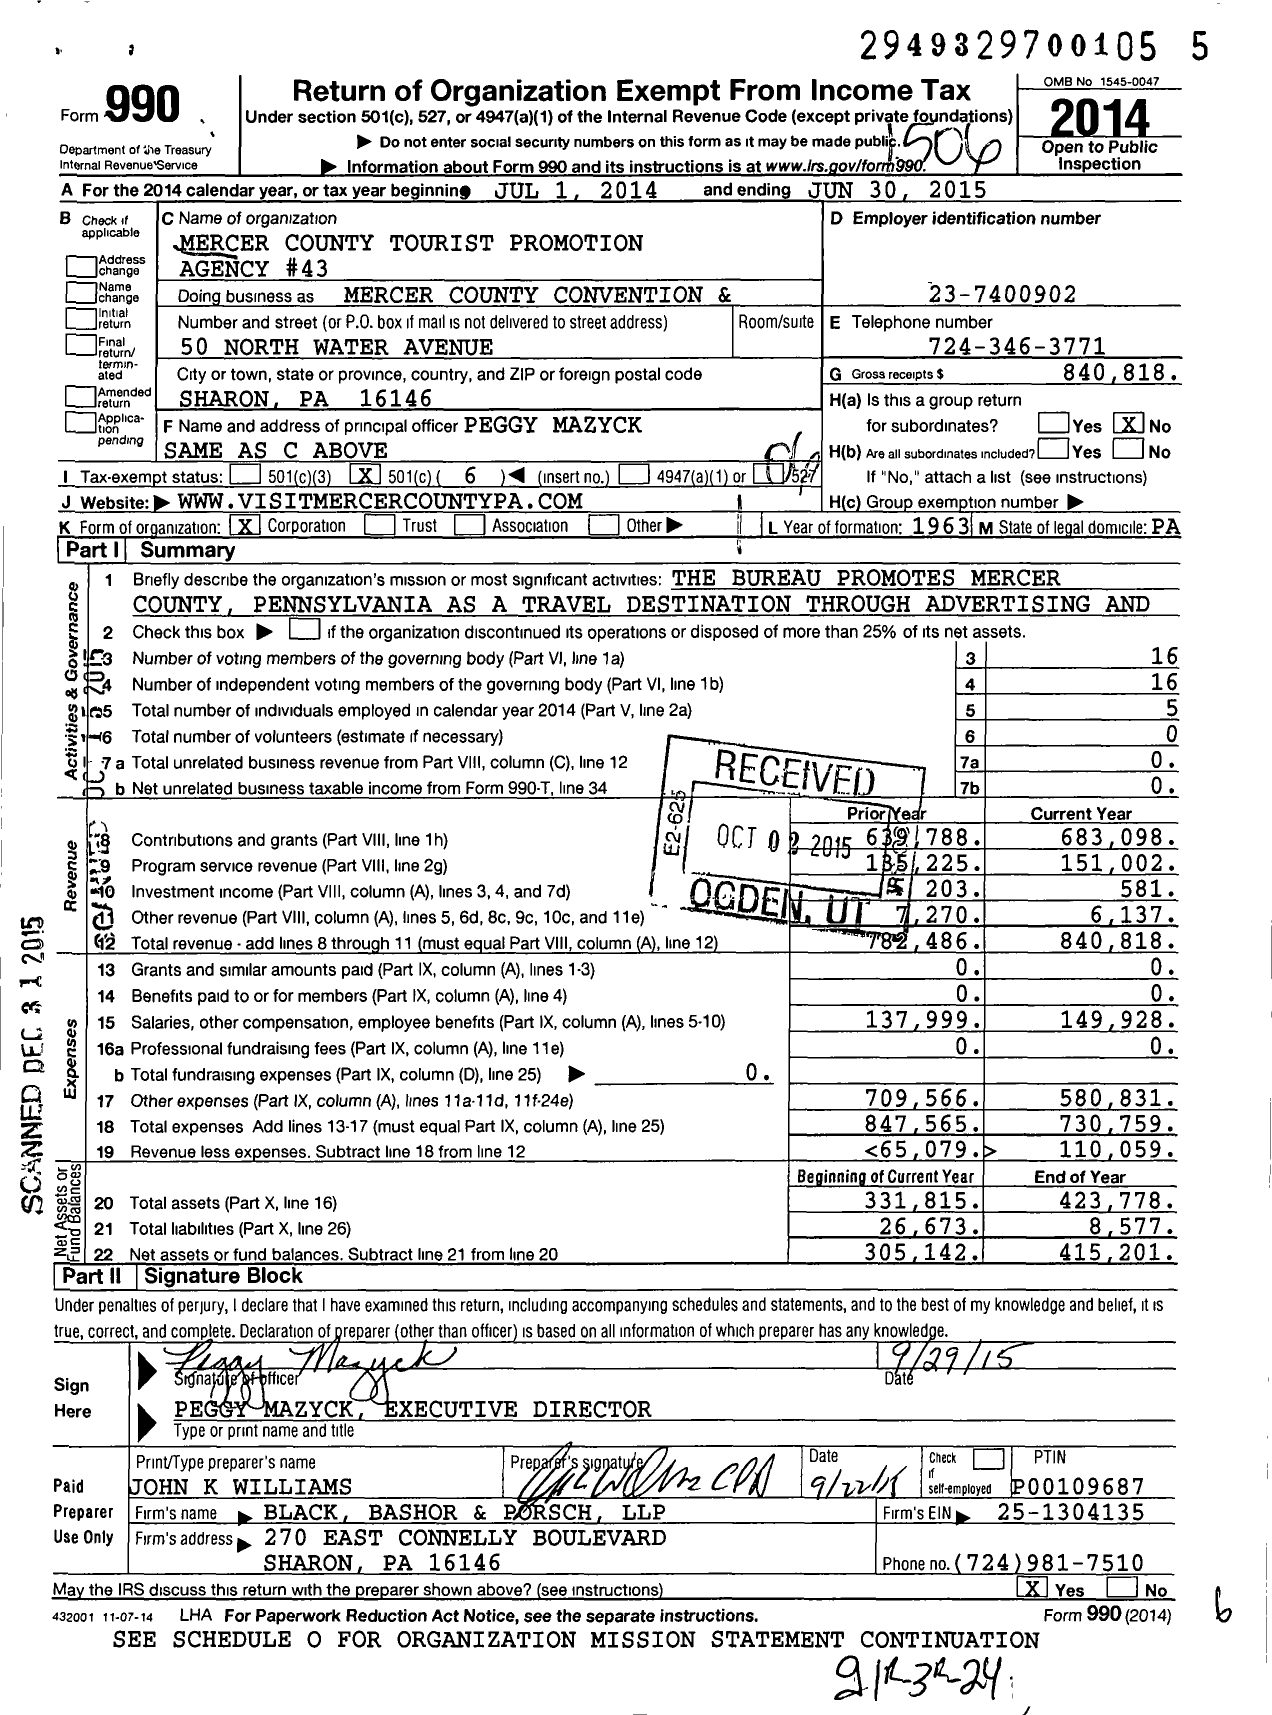 Image of first page of 2014 Form 990O for Mercer County Convention and Visitors Bureau / Mercer County Tourist Promotion Agency #43